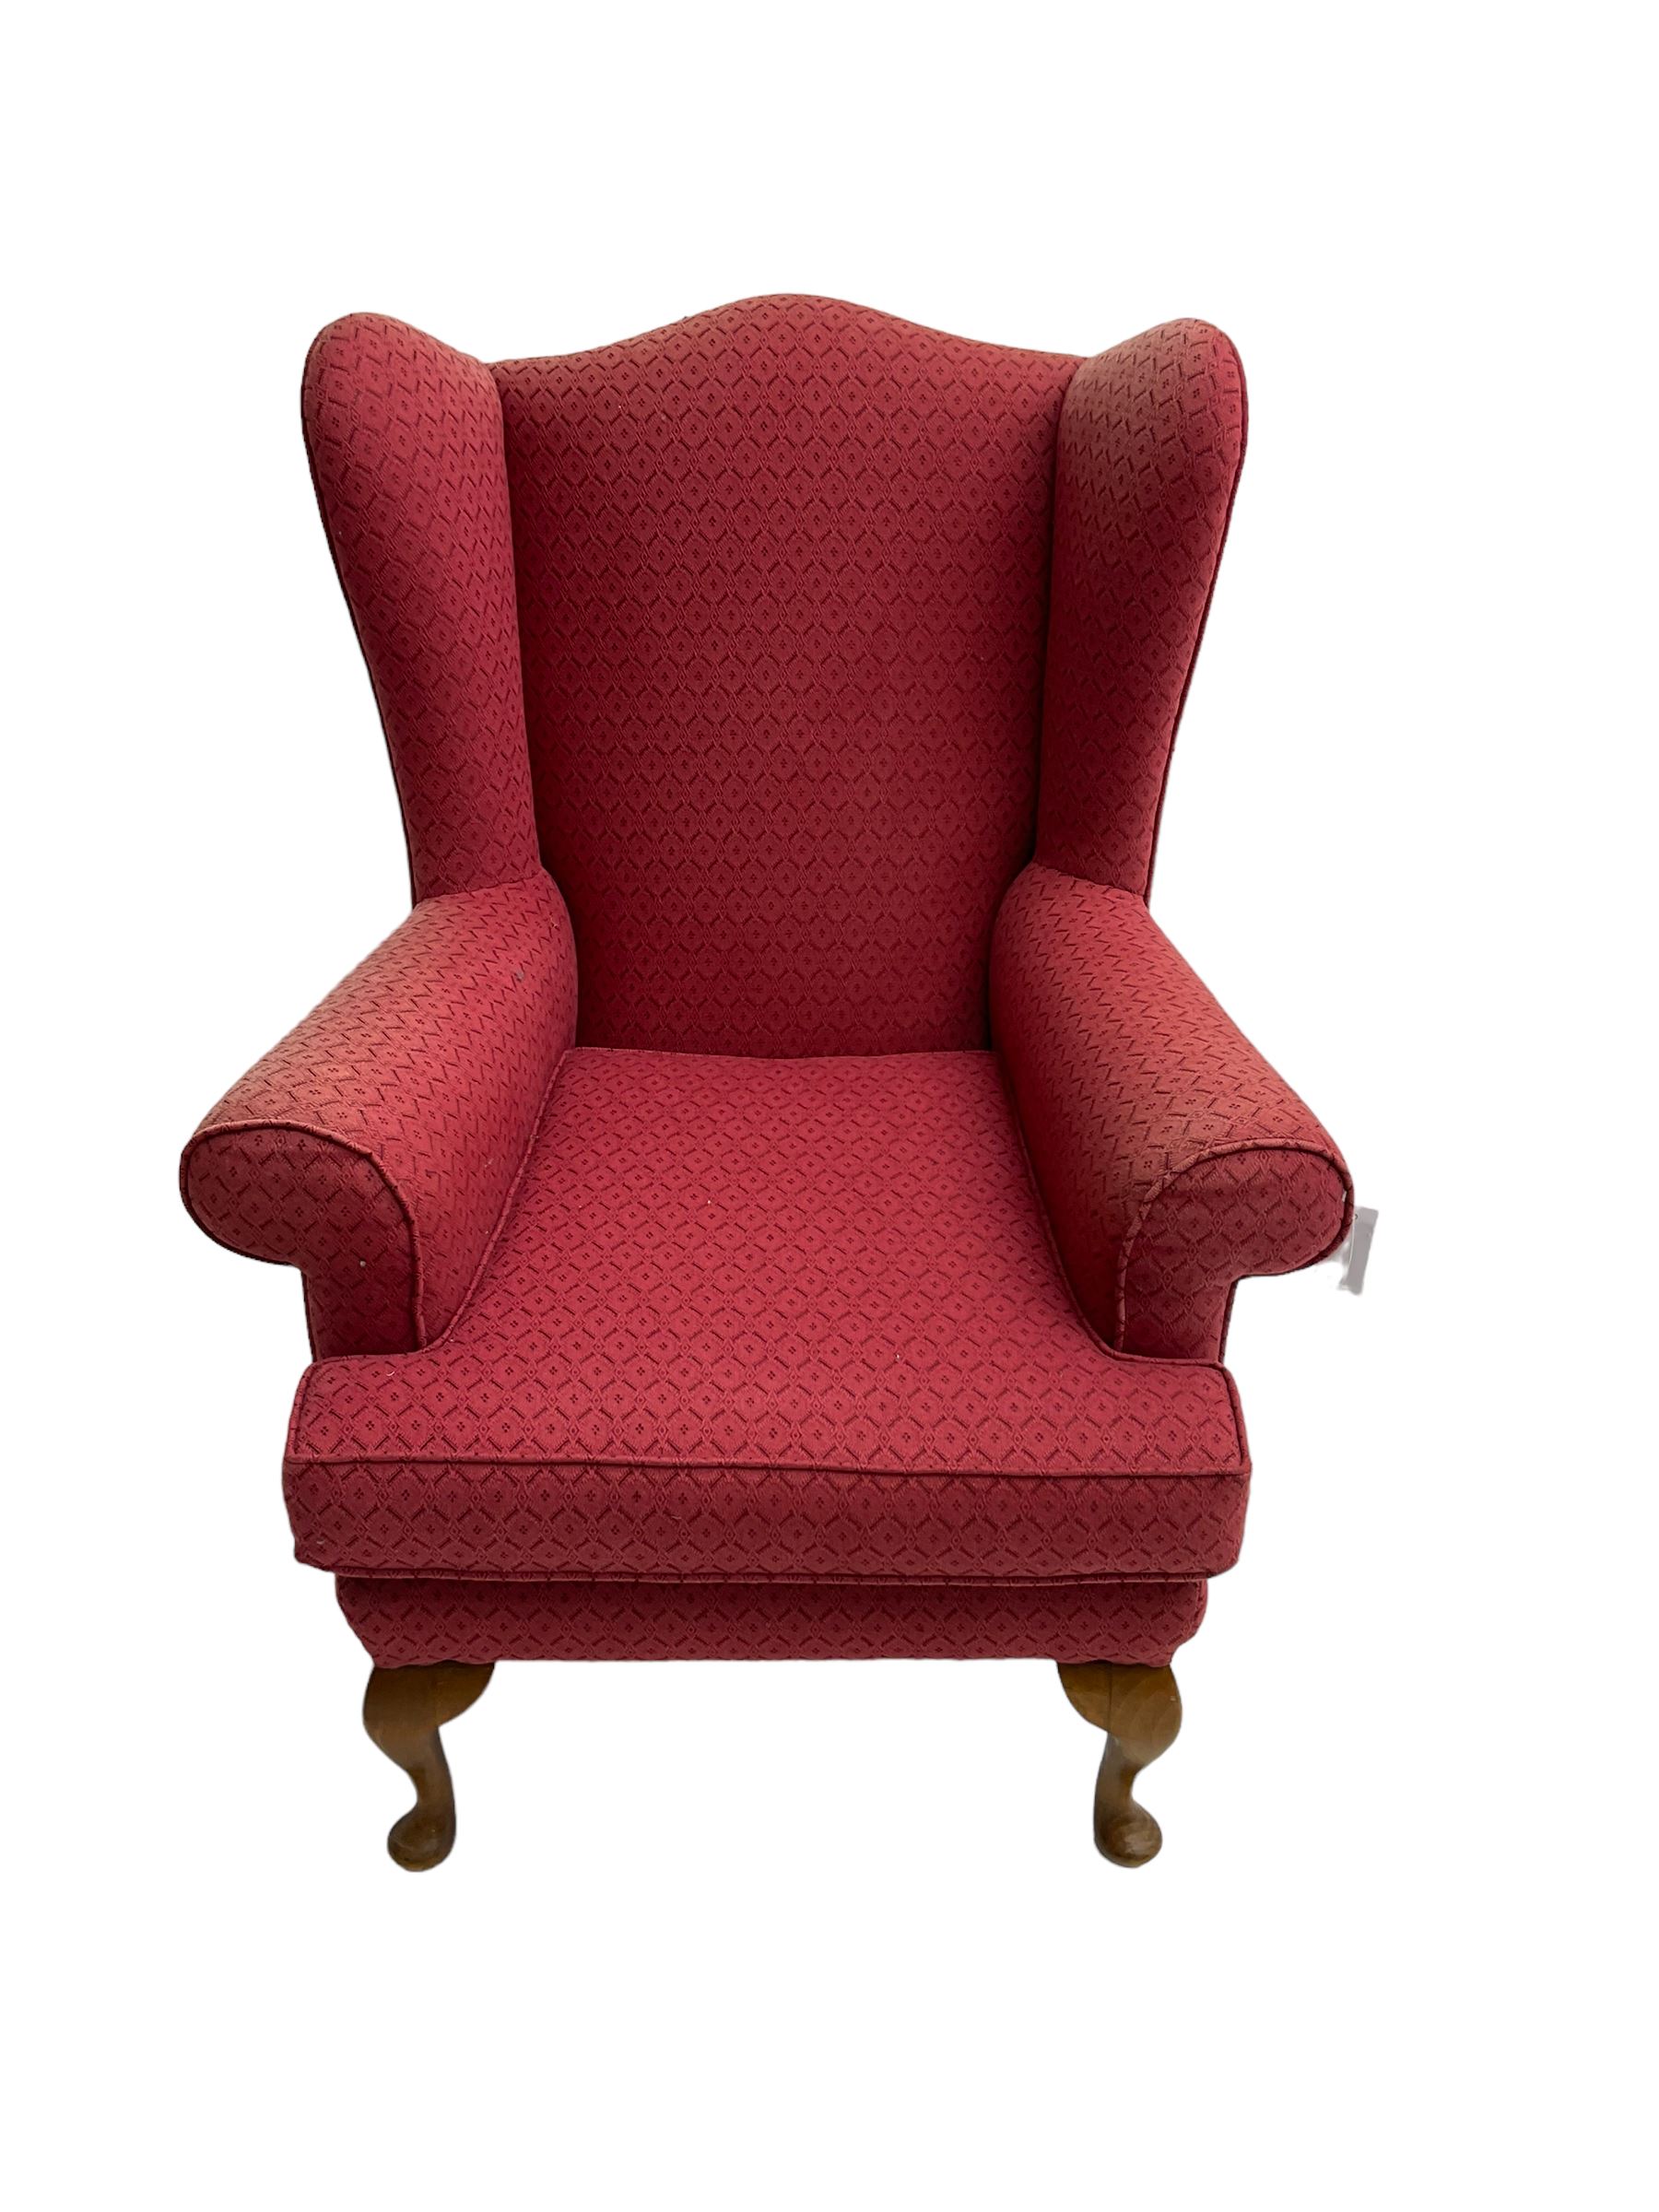 Queen Anne design wingback armchair - Image 3 of 7